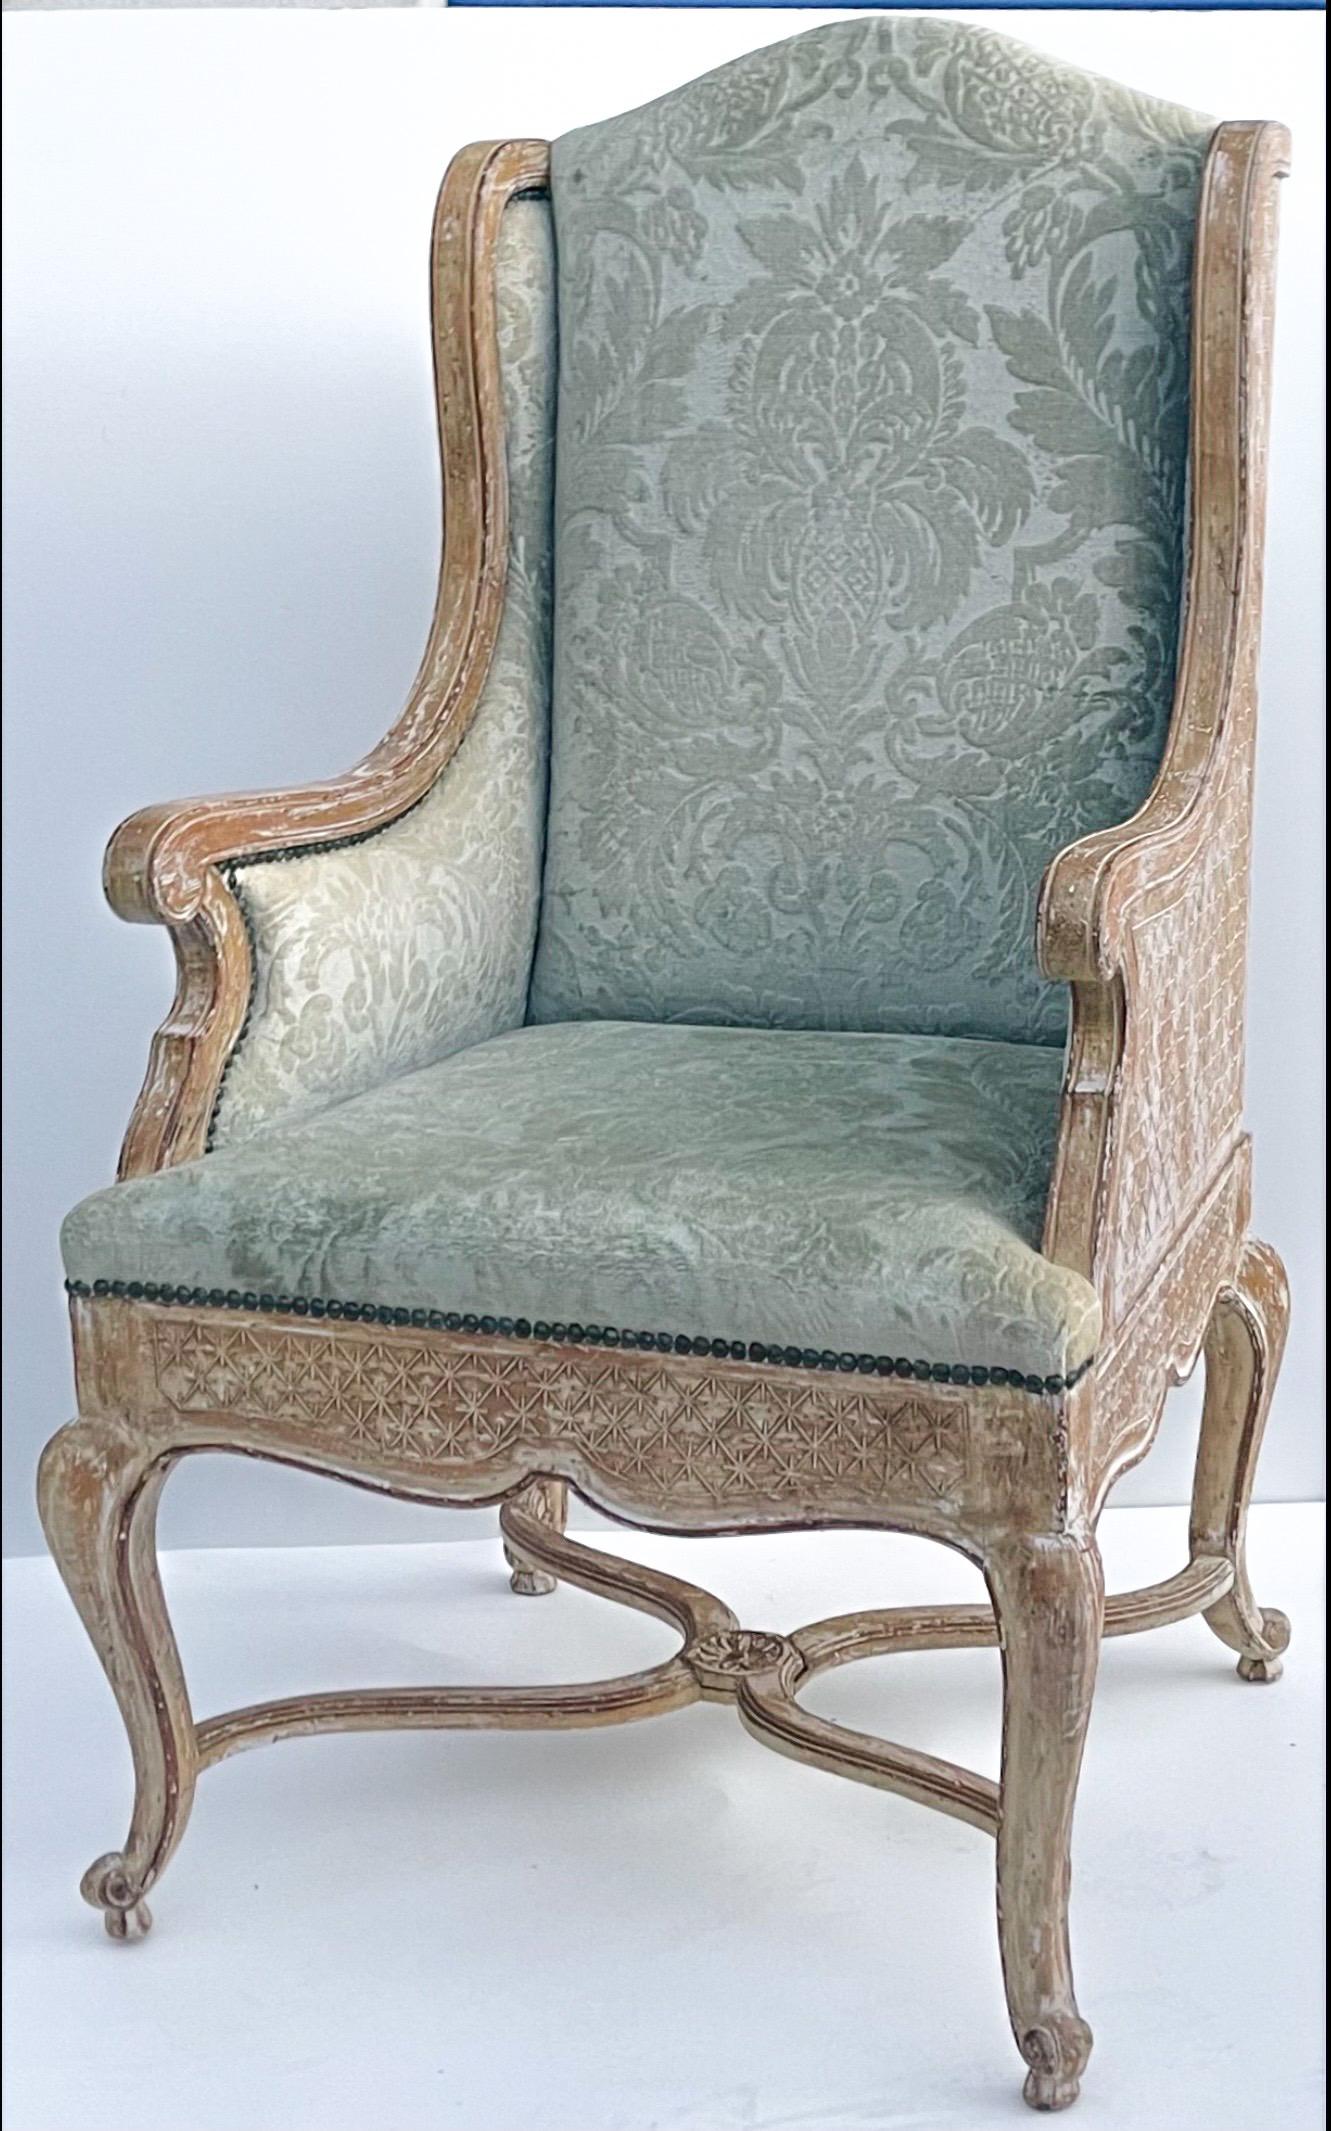 This is a killer chair! The cerused finish is original as is the celadon cut velvet. The velvet is vintage and shows moderate wear. Patina! It is unmarked. Arm; 27.5 Seat; 20”. I am estimating this piece dates to the late 60s or early 70s.

My